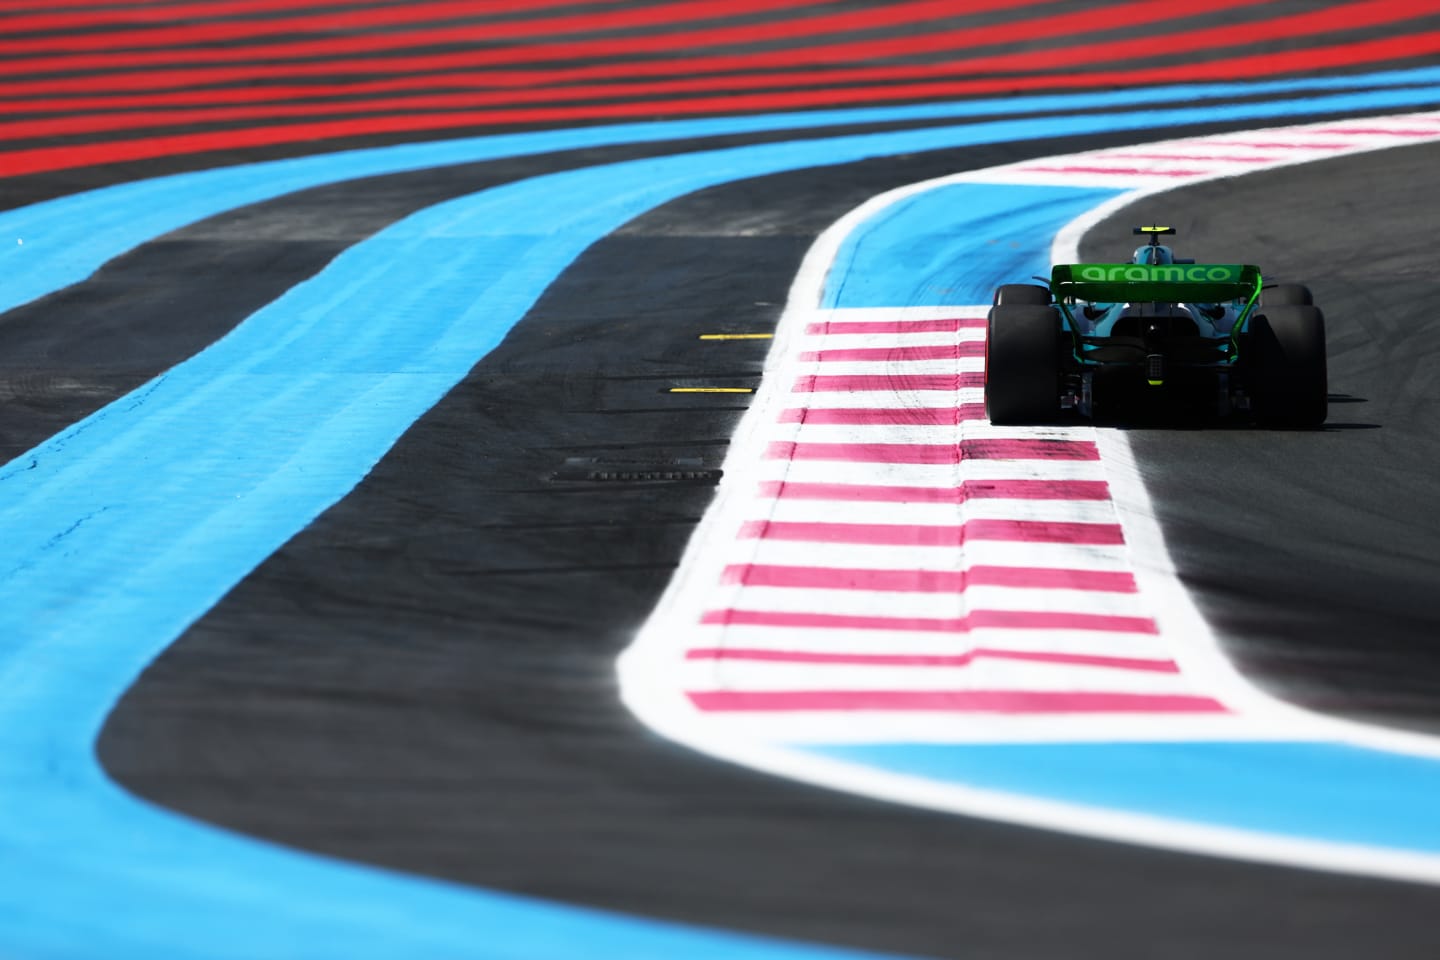 LE CASTELLET, FRANCE - JULY 22: Sebastian Vettel of Germany driving the (5) Aston Martin AMR22 Mercedes on track during practice ahead of the F1 Grand Prix of France at Circuit Paul Ricard on July 22, 2022 in Le Castellet, France. (Photo by Clive Rose/Getty Images)